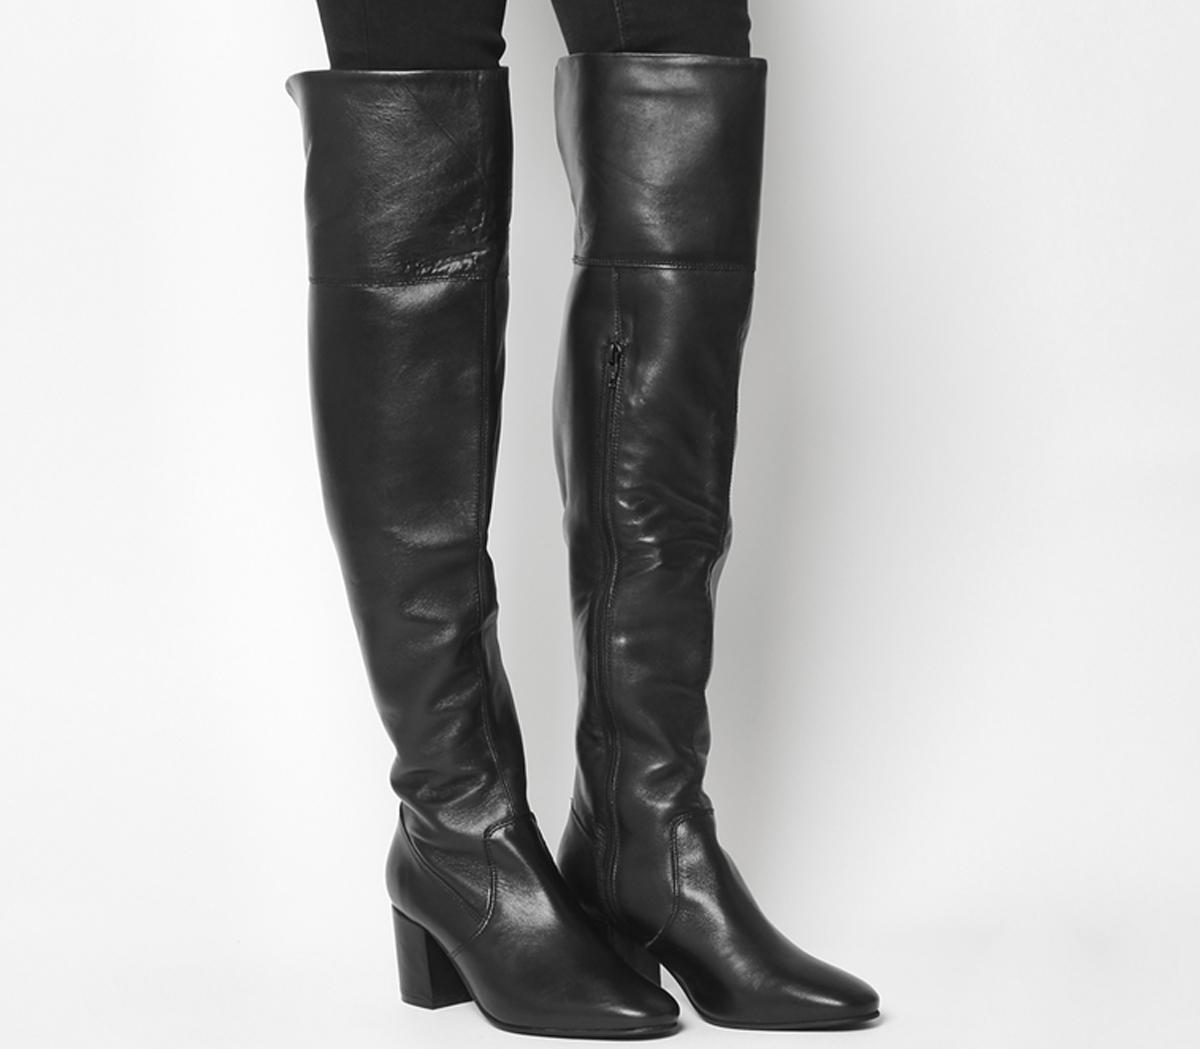 Office Krissy Over The Knee Boots Black Leather Knee High Boots